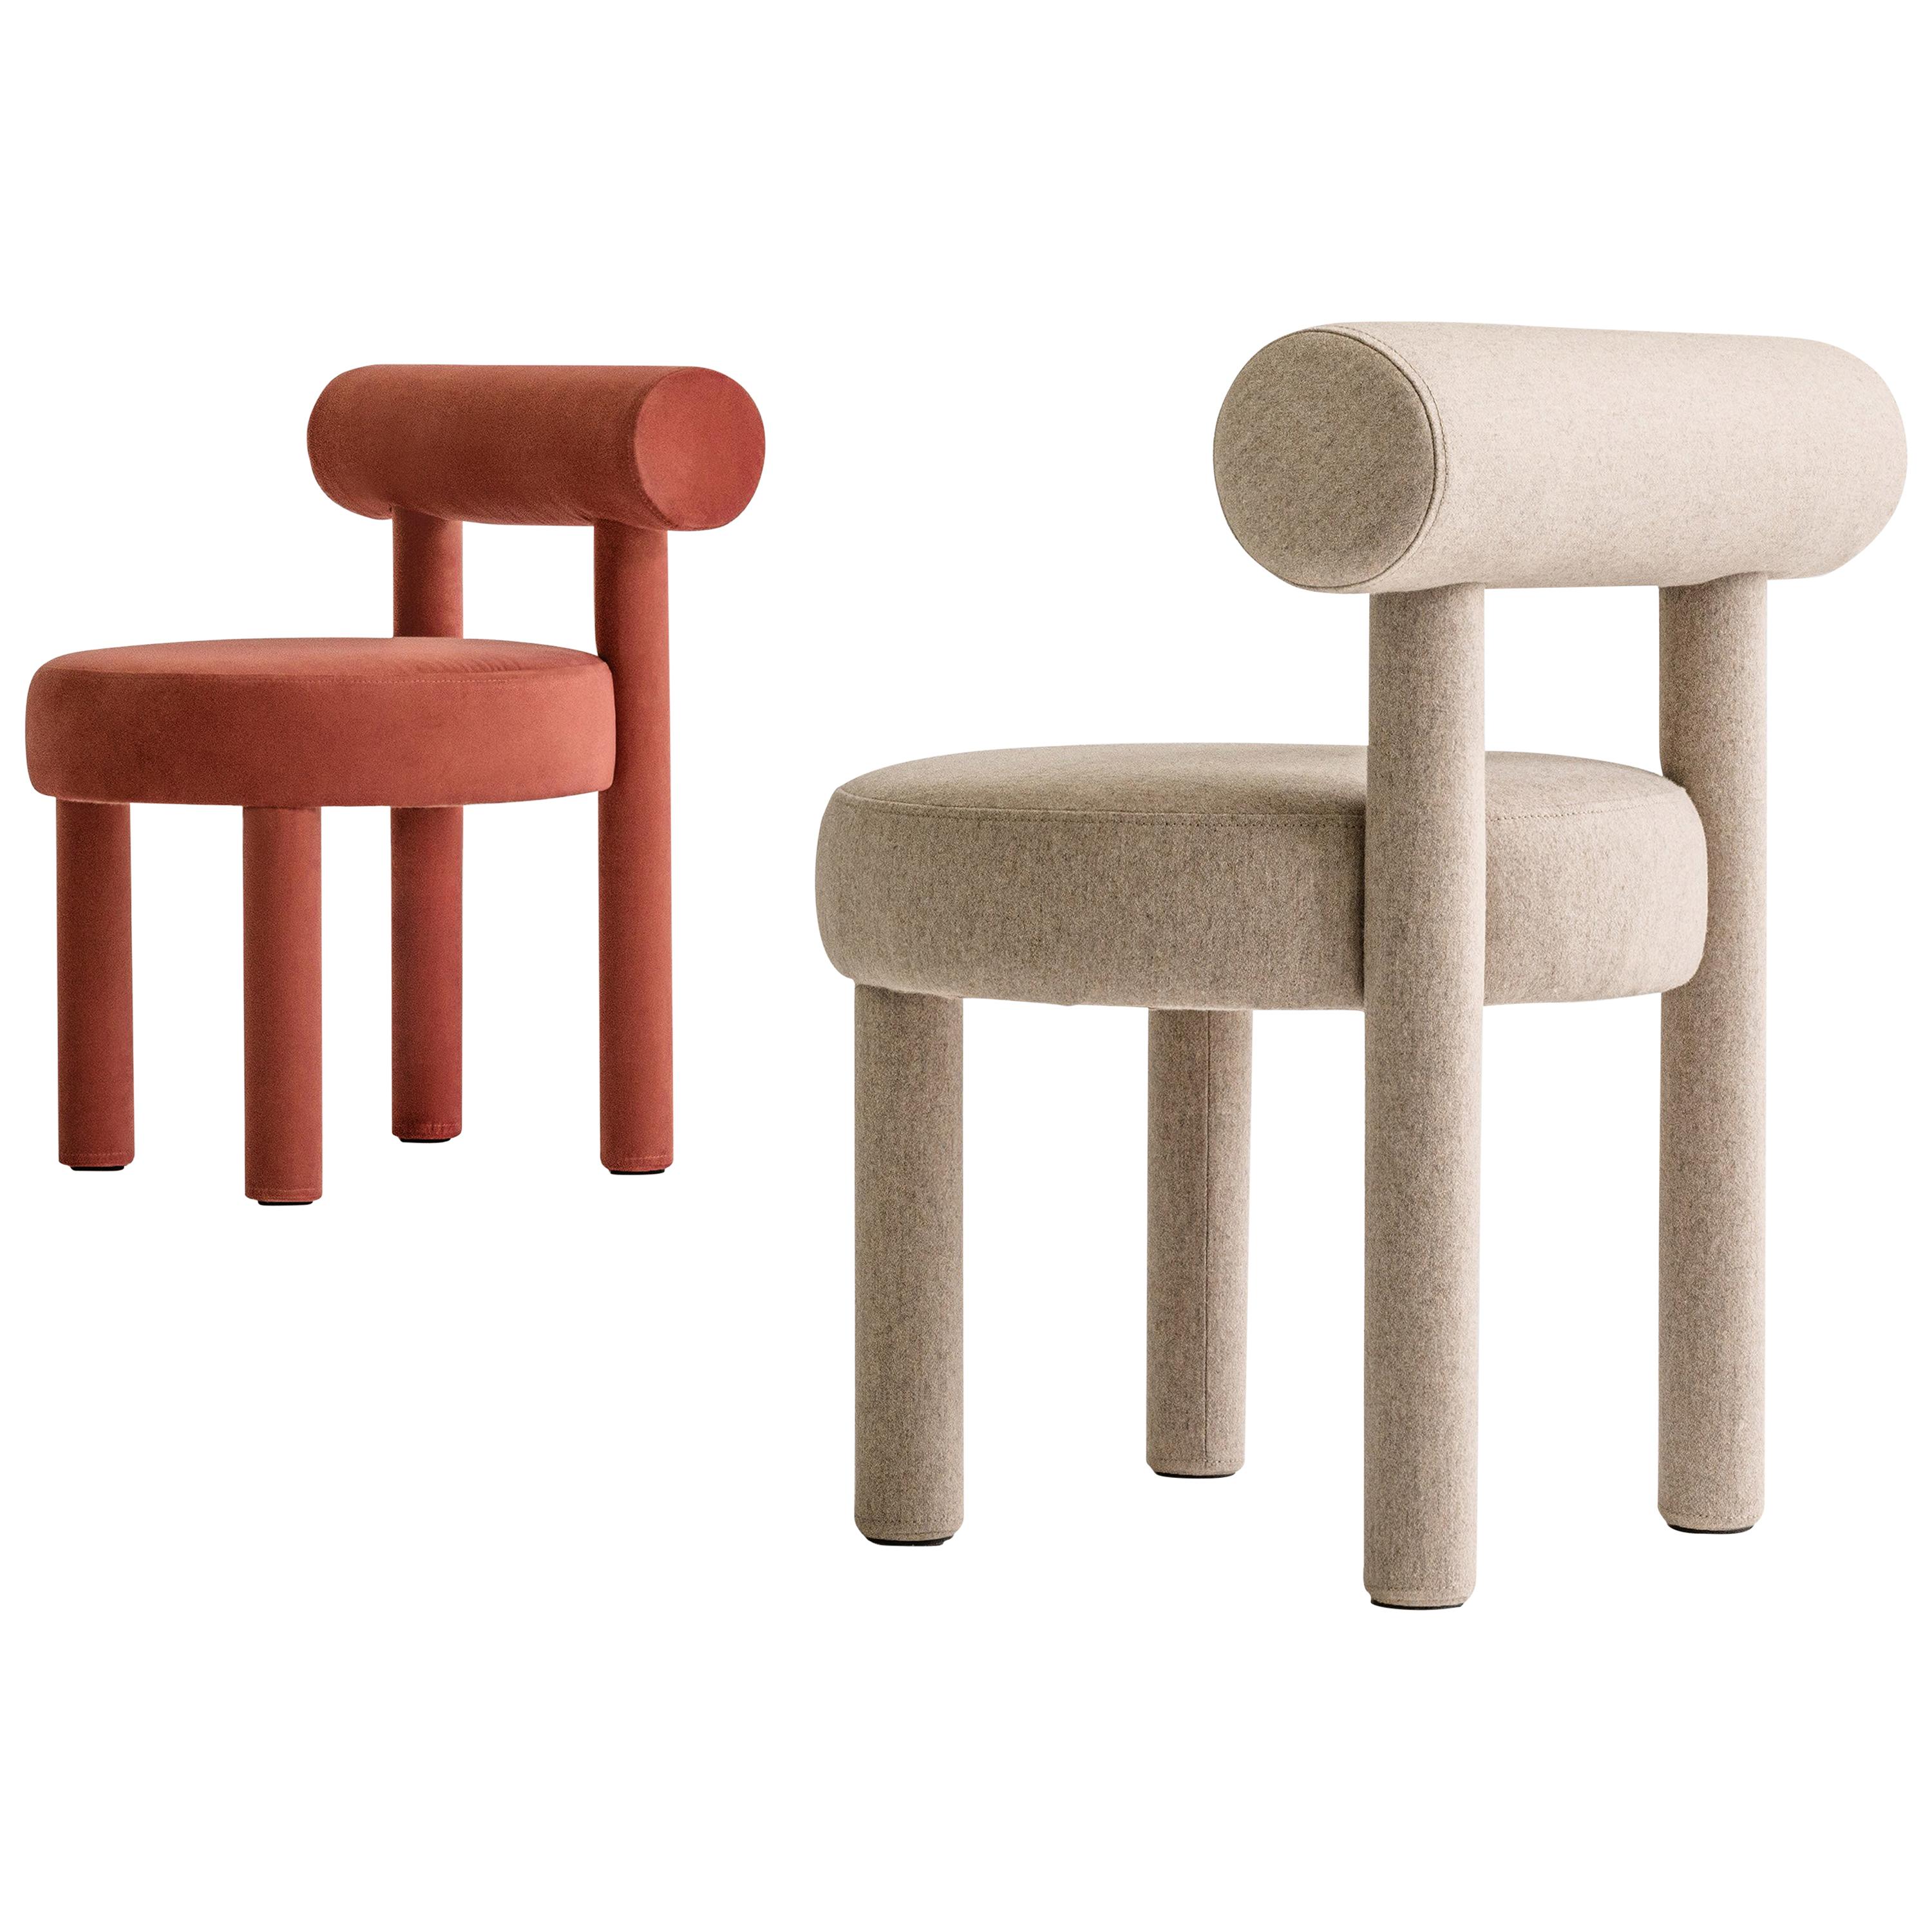 Set of Two Modern Dining Chair Gropius CS1 in Different Fabrics by Noom